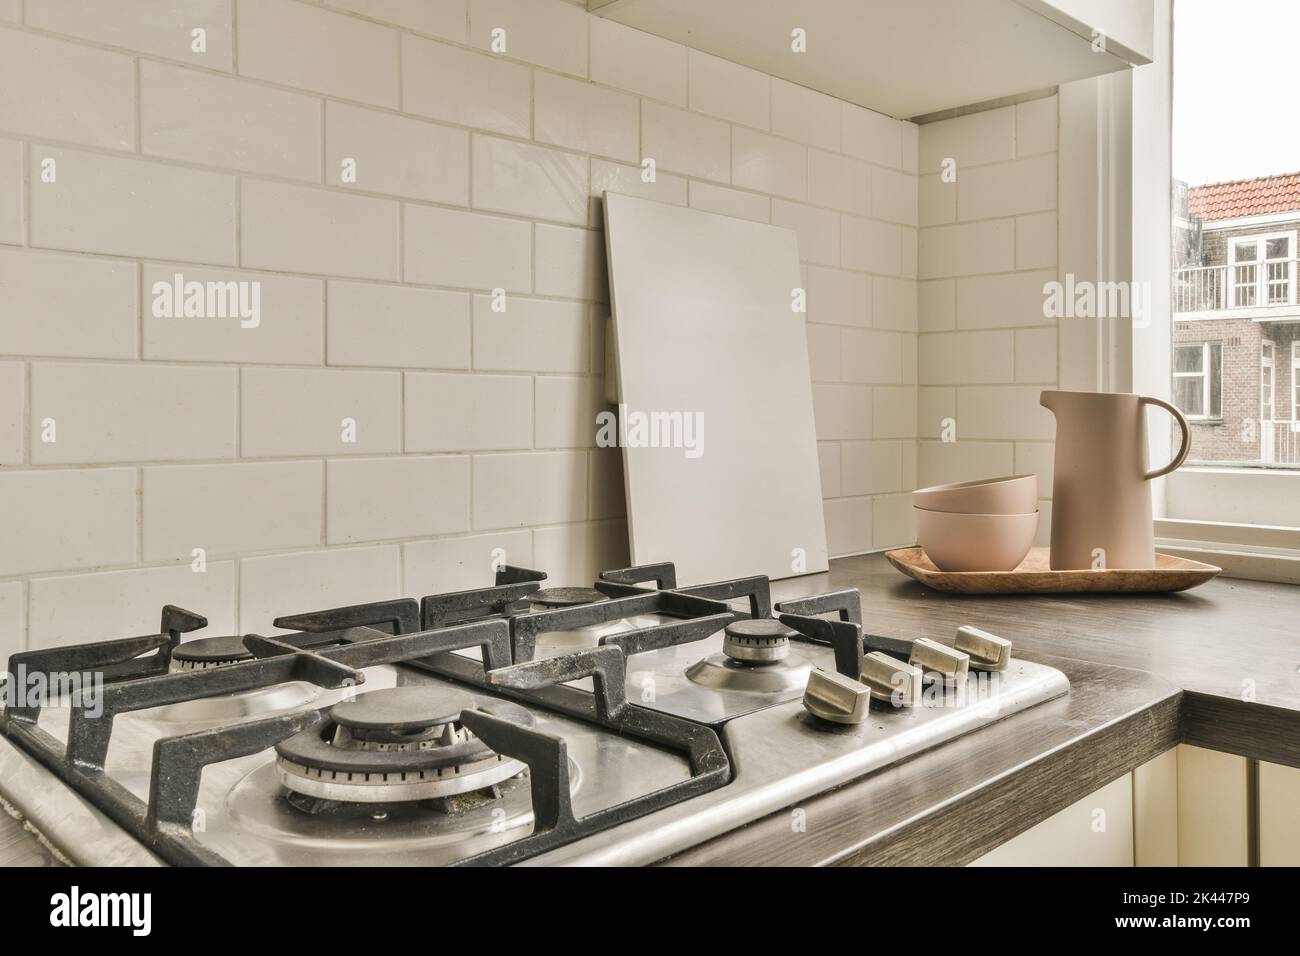 Interior of light kitchen with steel hood over stove apartment and appliances Stock Photo